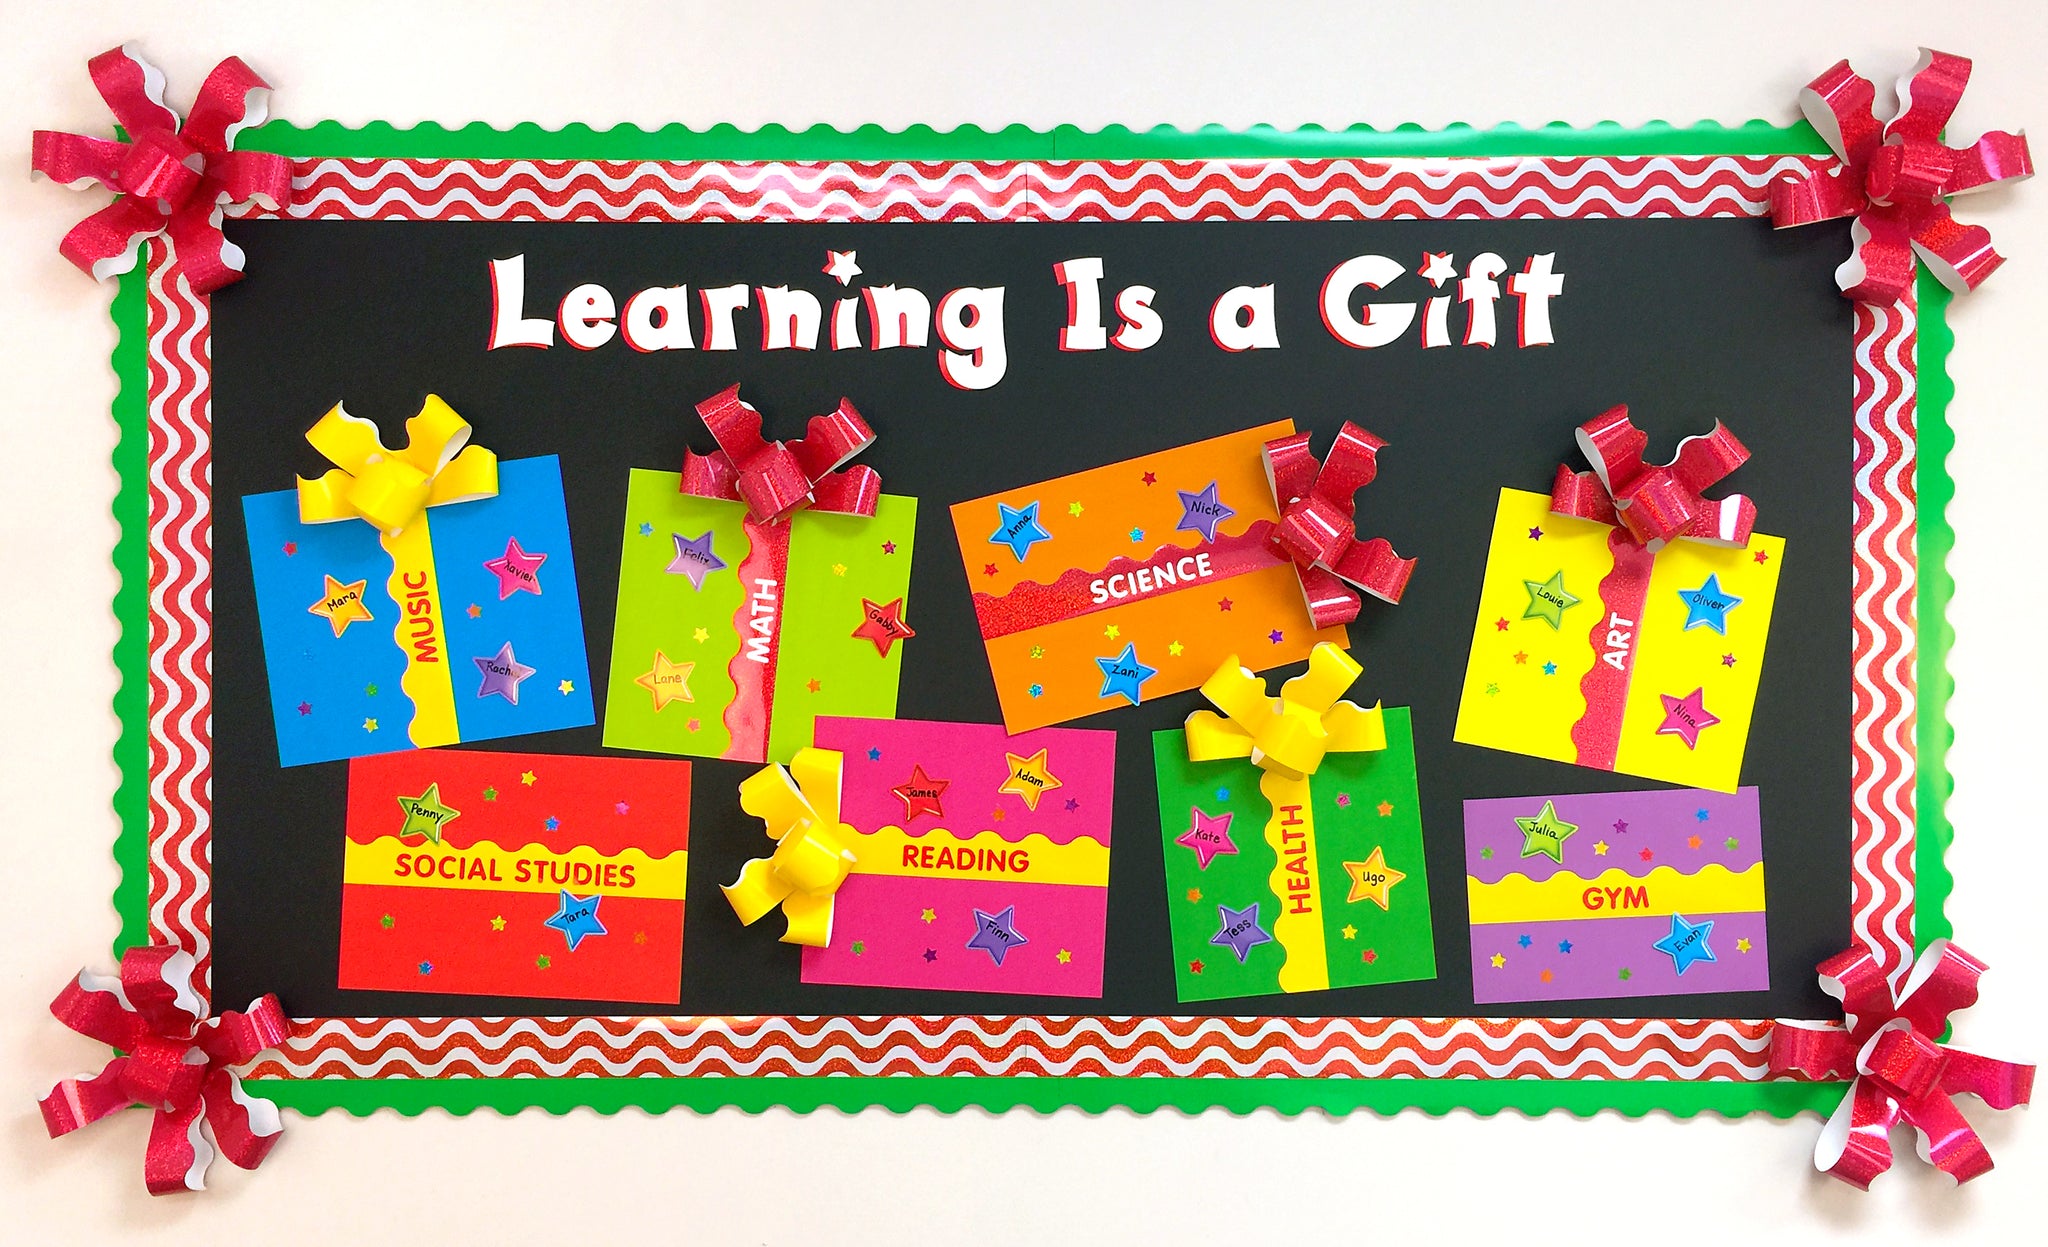 Learning is a gift Christmas holiday bulletin board idea.